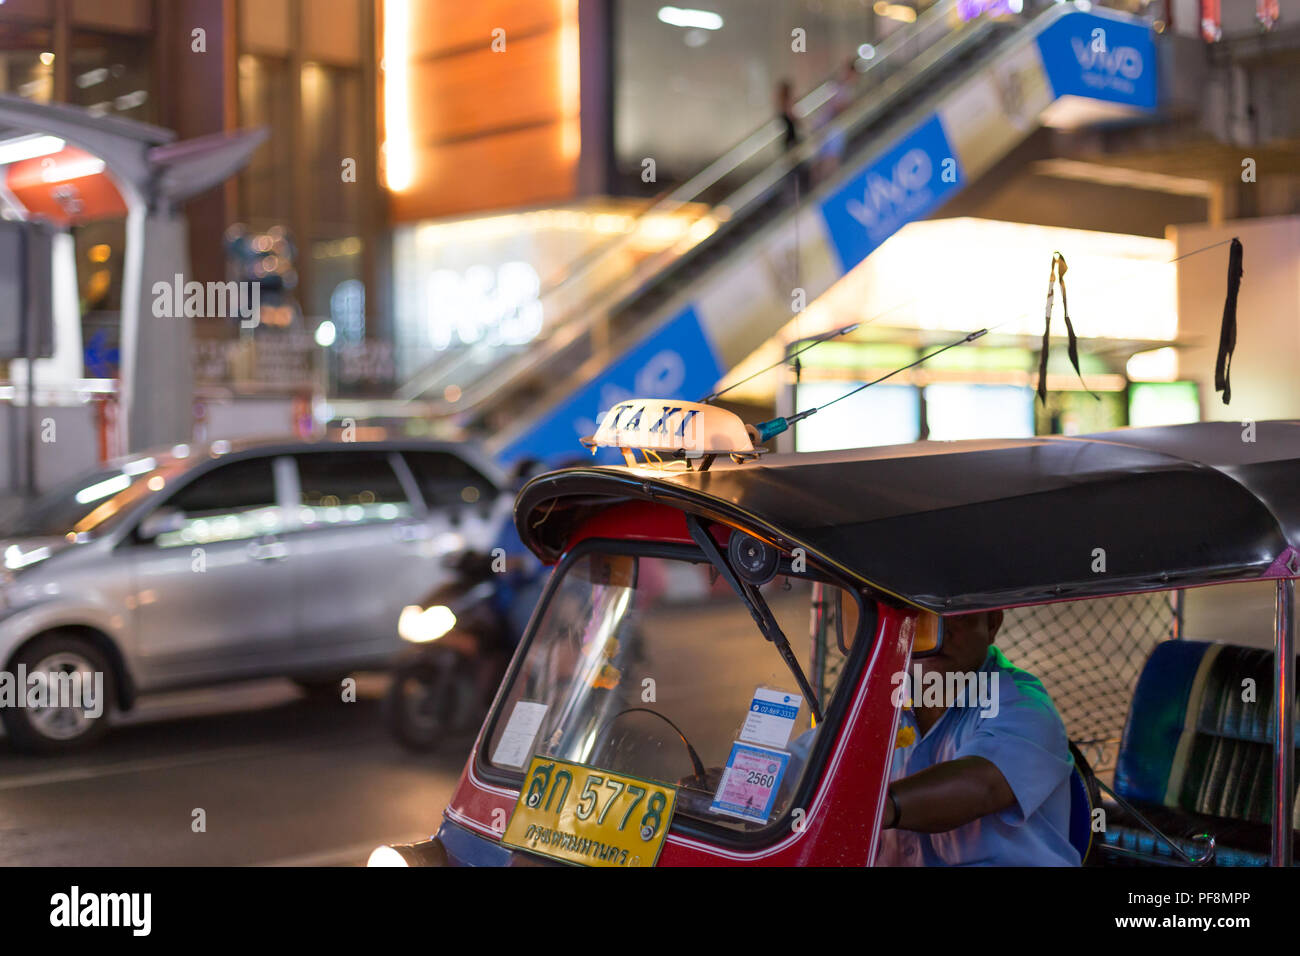 Jan11,2016 : Bangkok Thailand - 5778 Thai number plate on Tuk-Tuk parking on the rond with vivo logo in background. Stock Photo